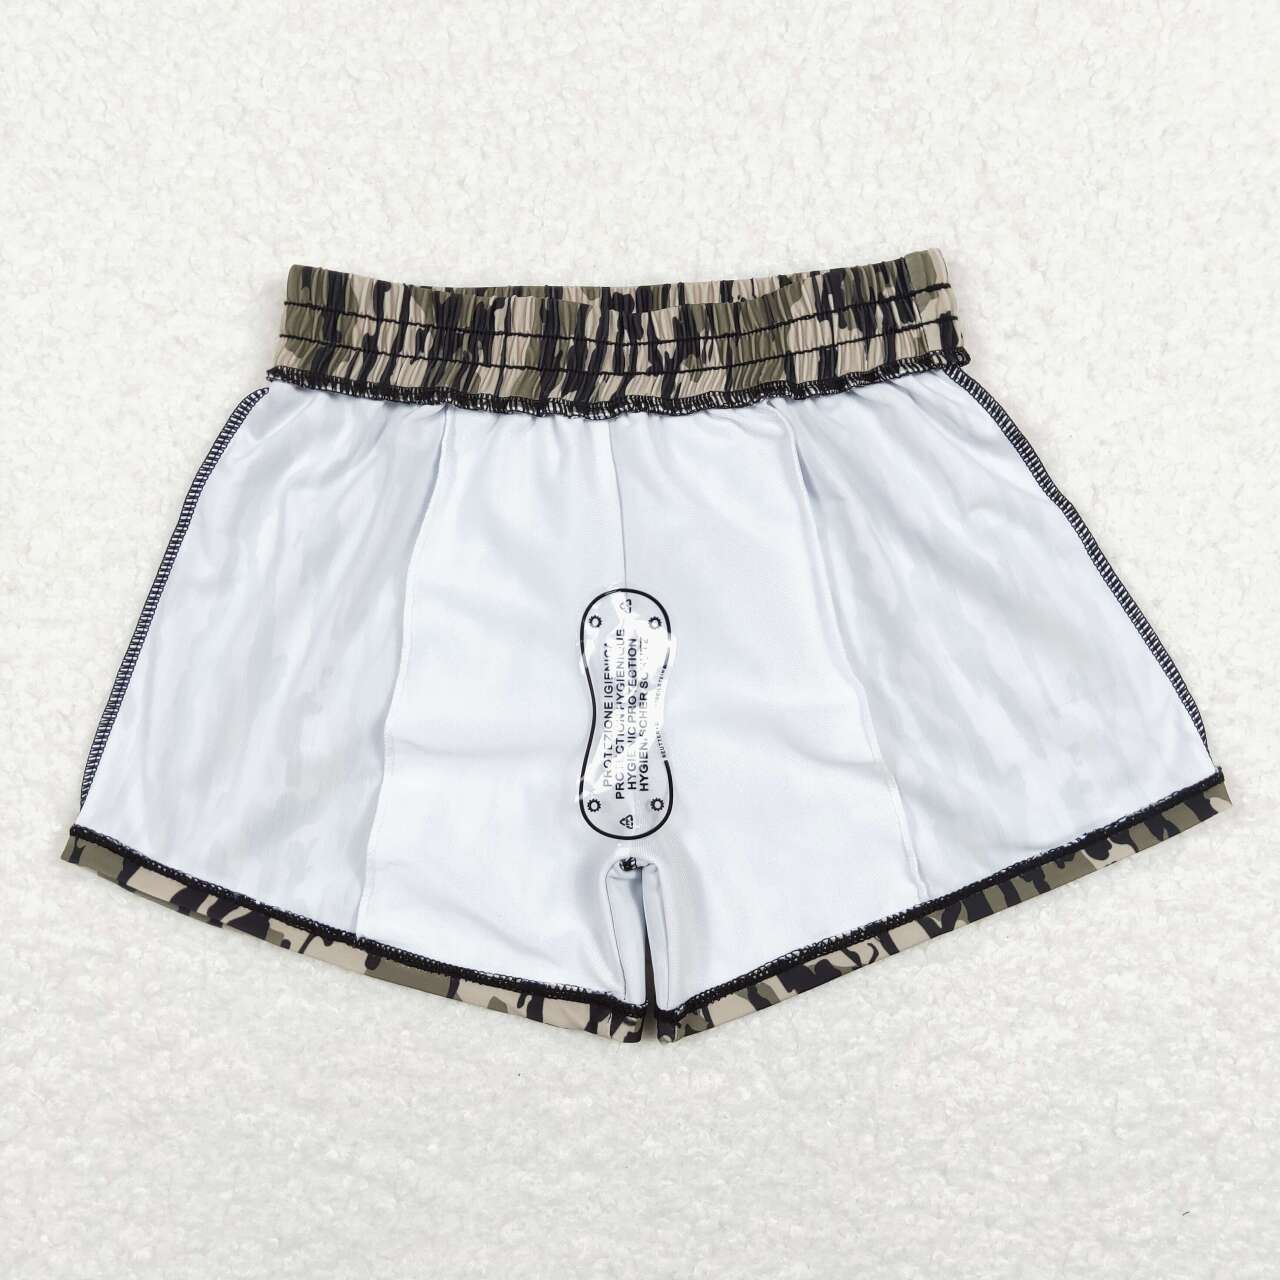 S0194 Boys camouflage swimming trunks